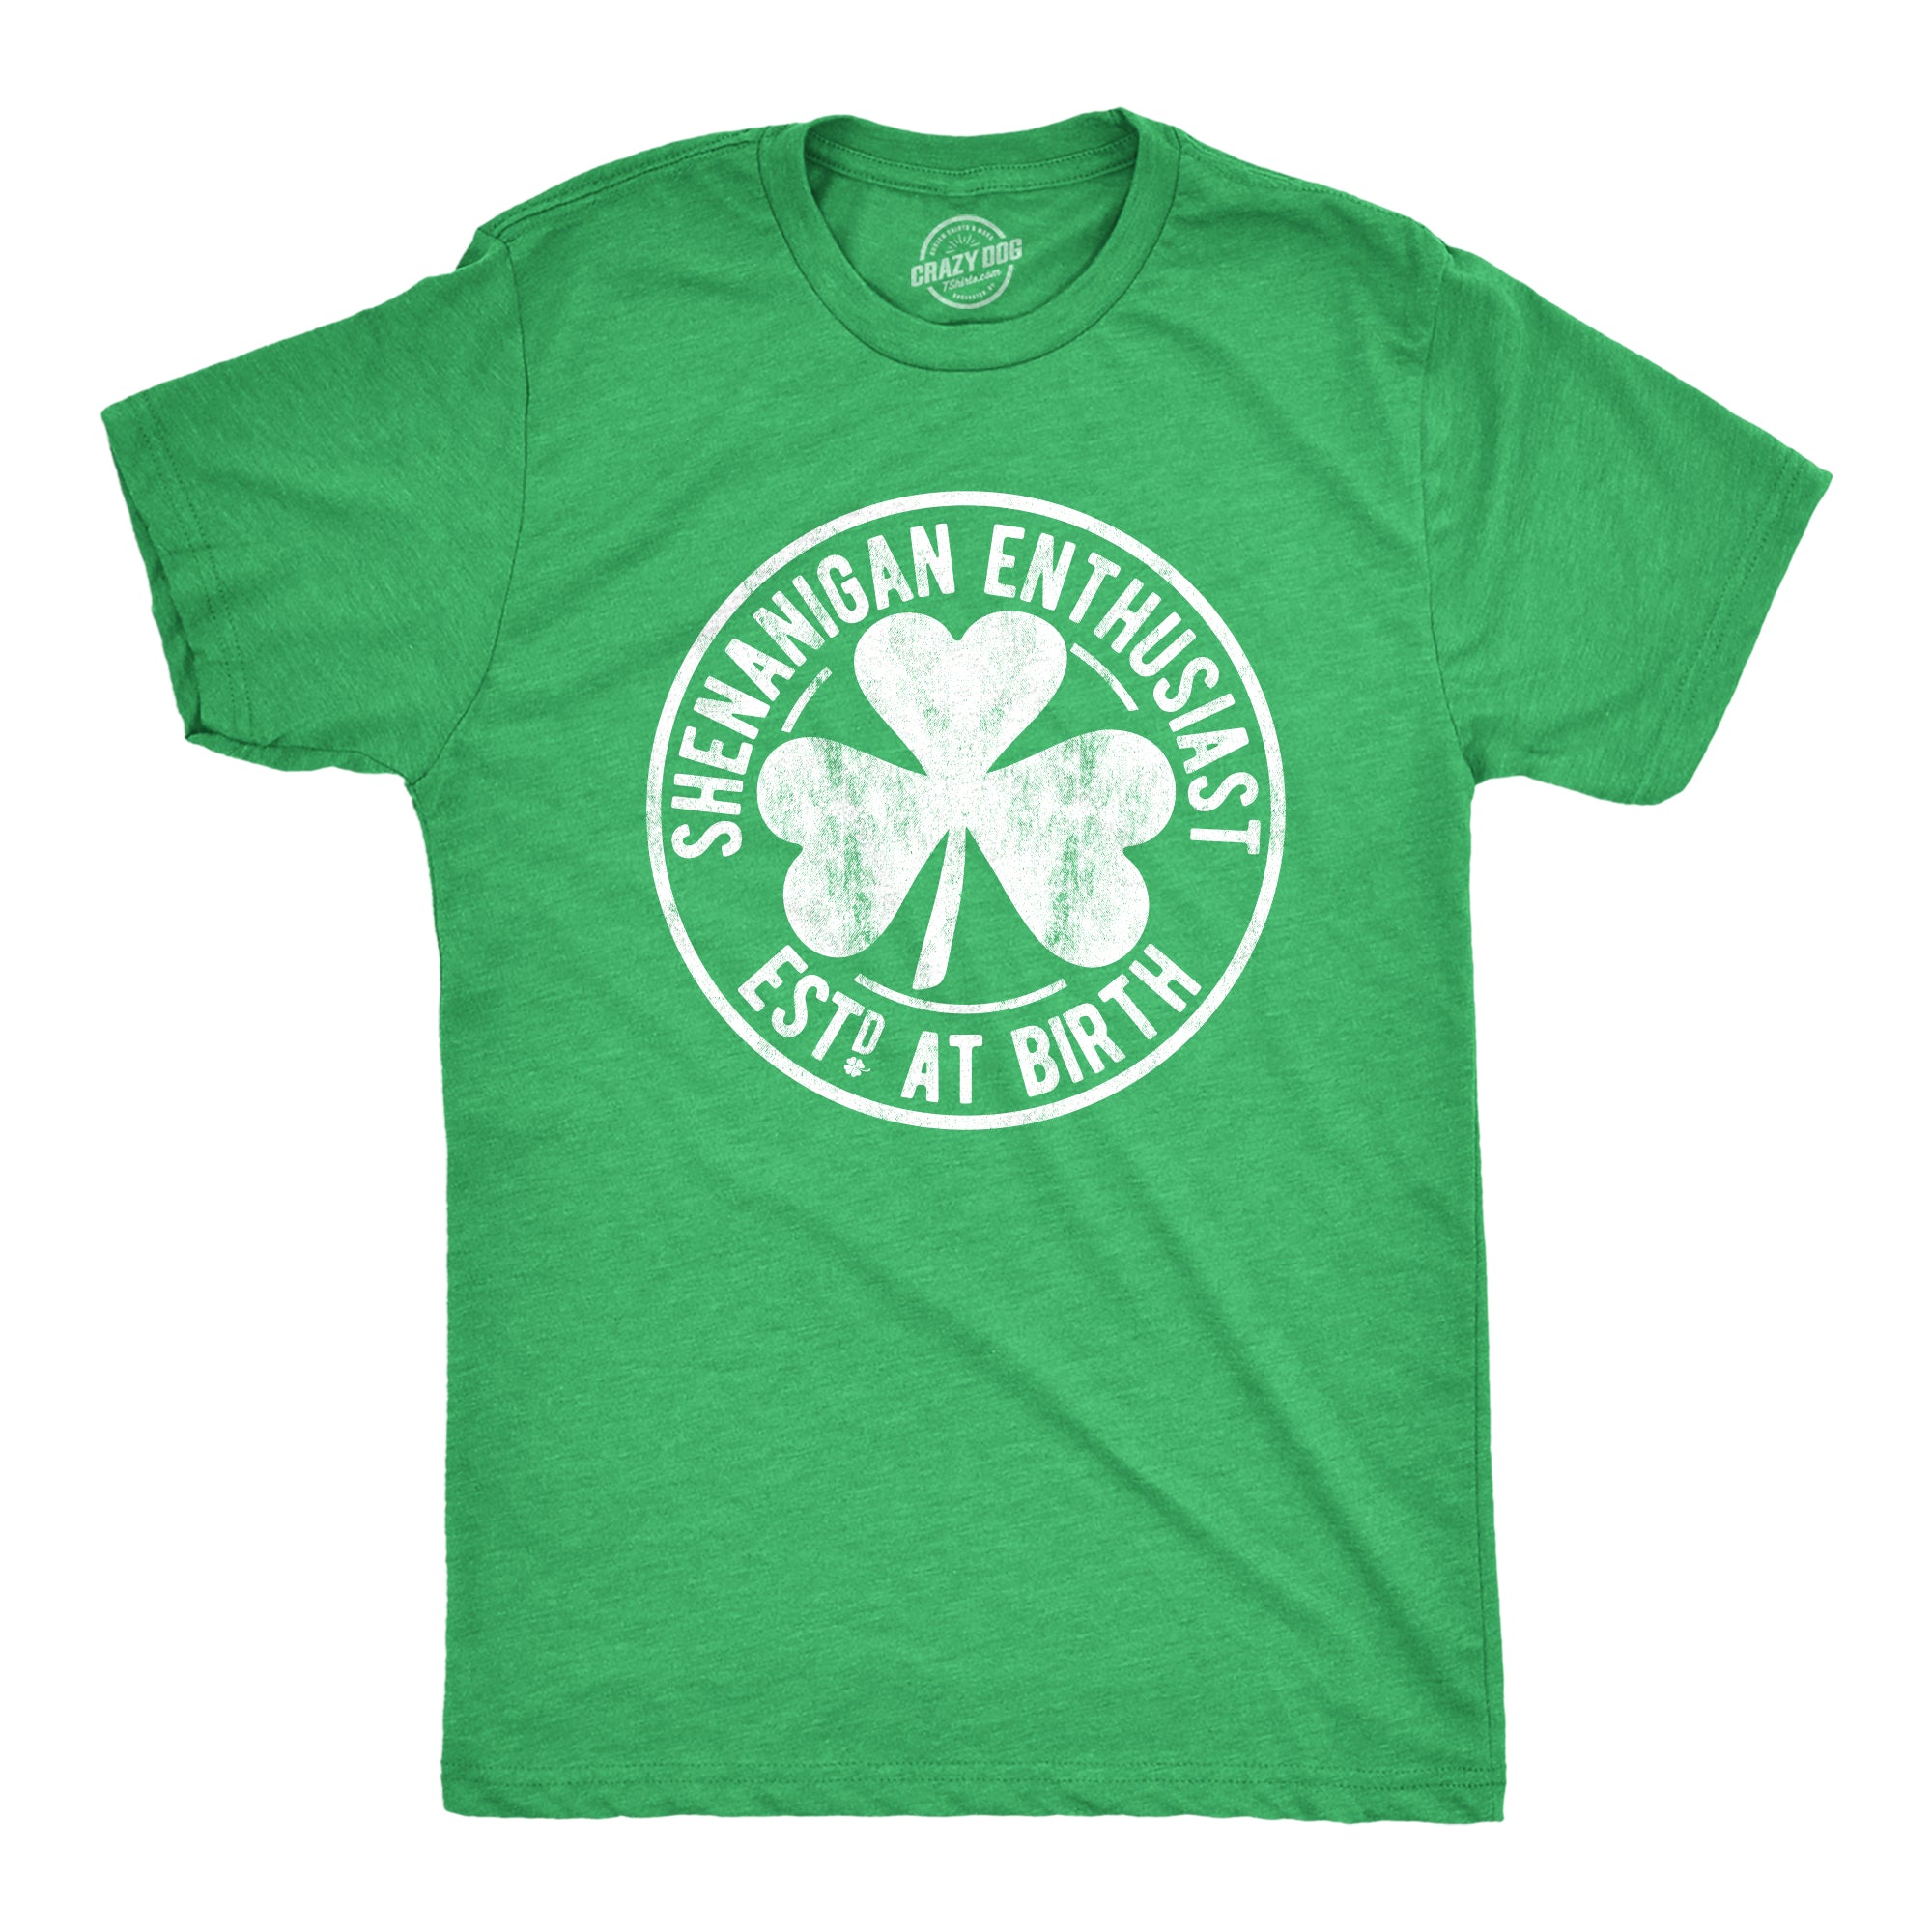 Funny Heather Green - Shenanigan Enthusiast Logo Shenanigan Enthusiast Est. At Birth Mens T Shirt Nerdy Saint Patrick's Day Drinking Beer Tee